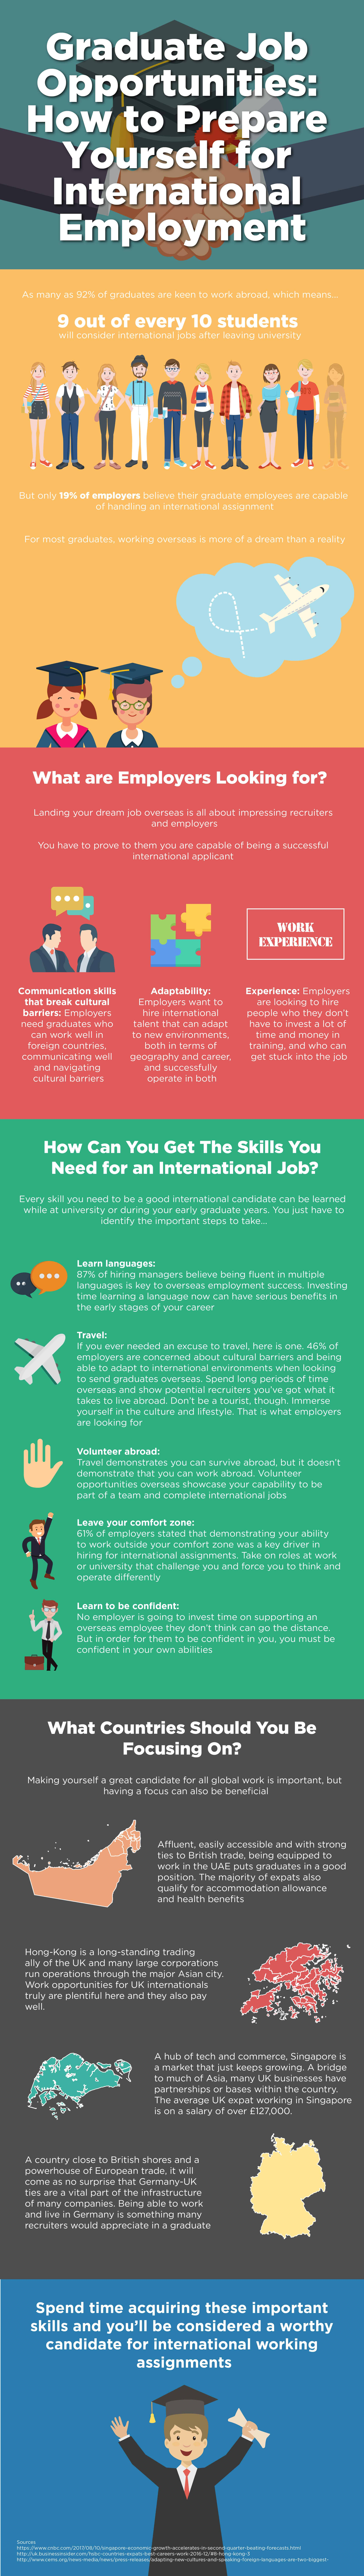 An infographic showing the benefits of getting a graduate job overseas